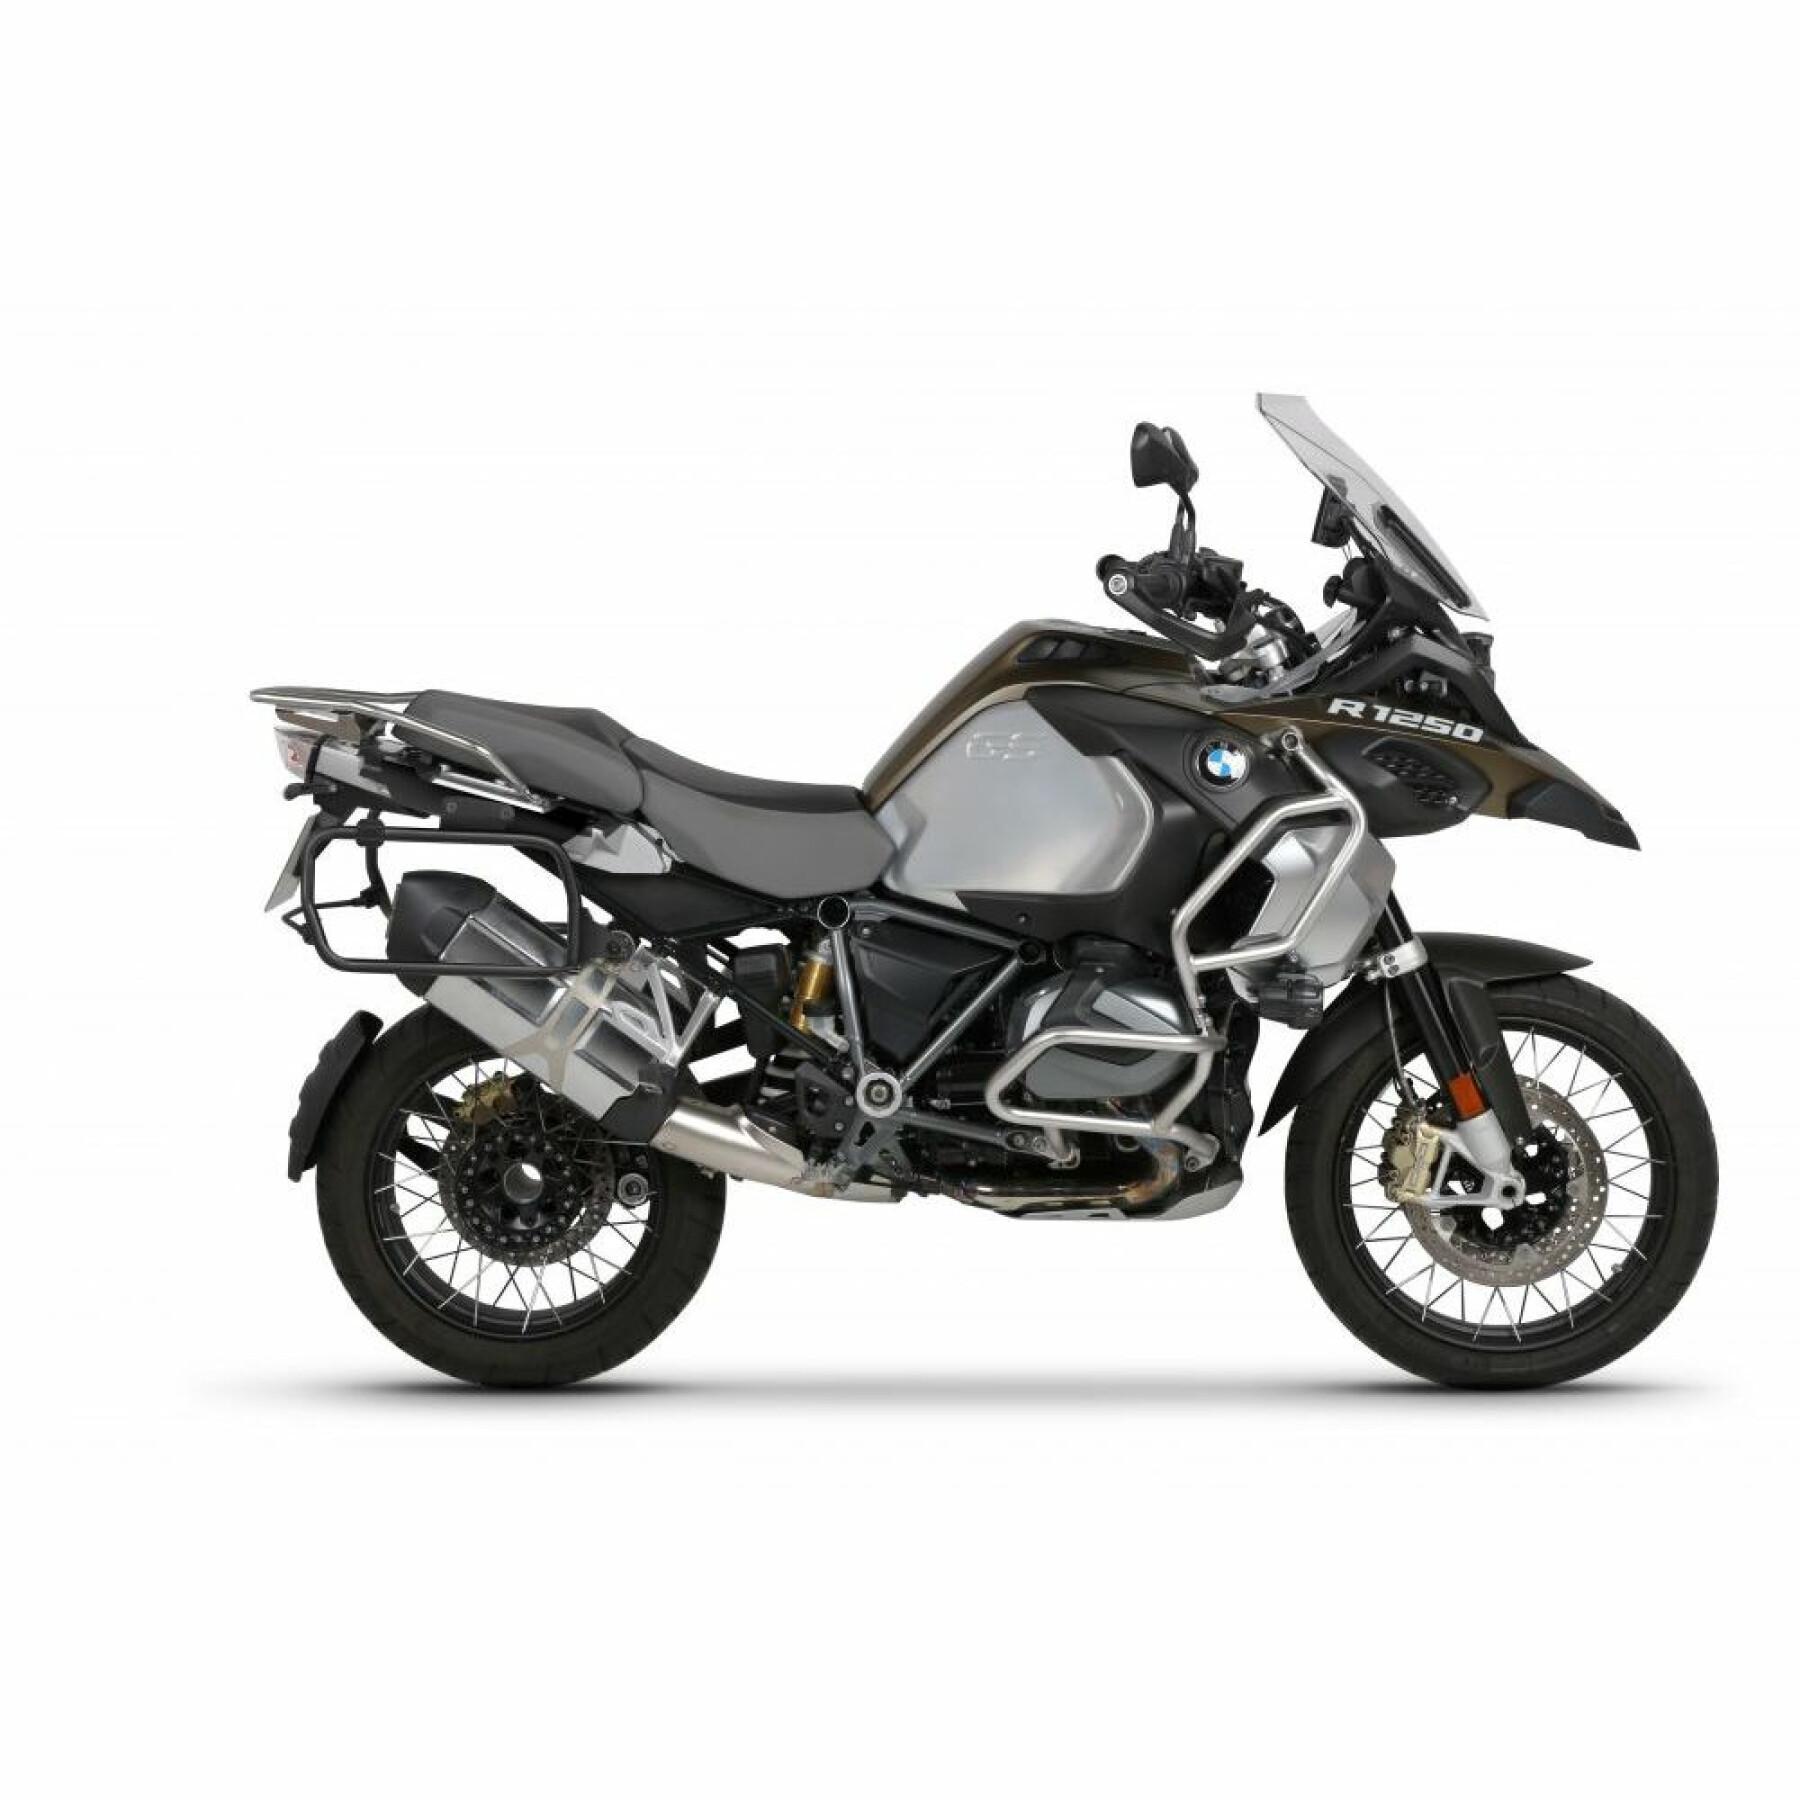 Support valises latérales Shad 4P System Bmw R1200/R1250Gs Adventure